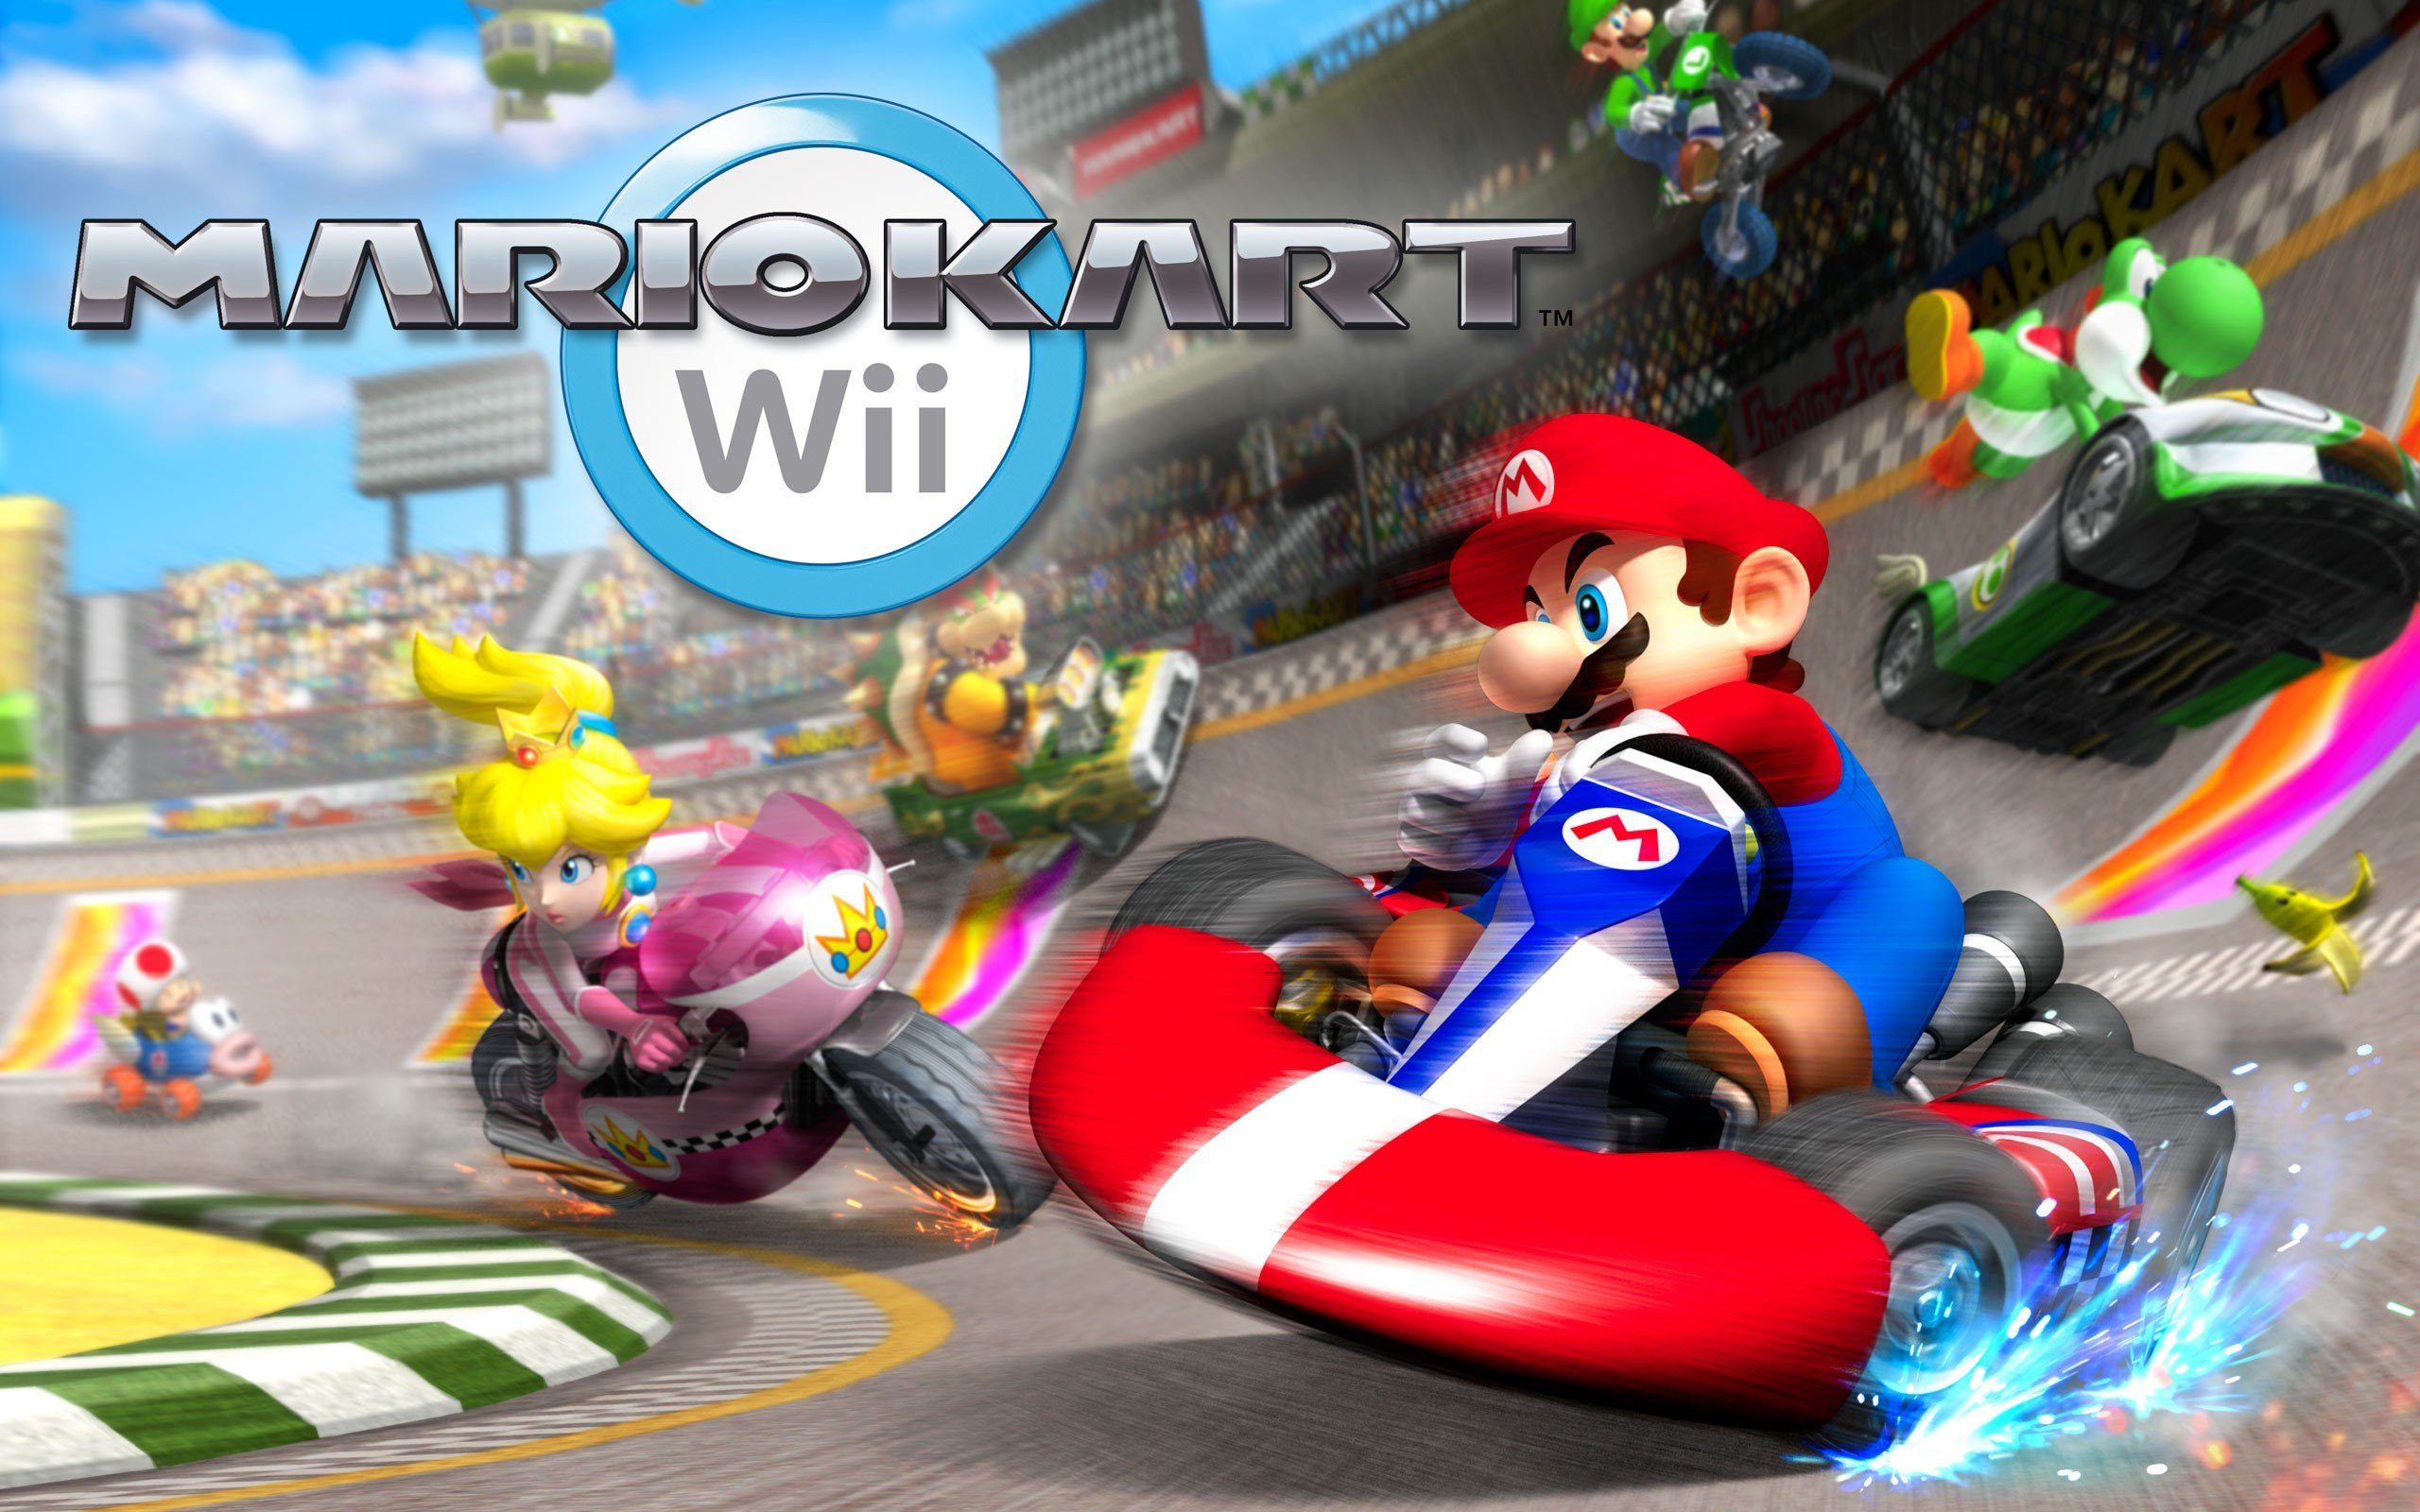 Download hd 2560x1600 Mario Kart Wii PC wallpaper ID:324488 for free